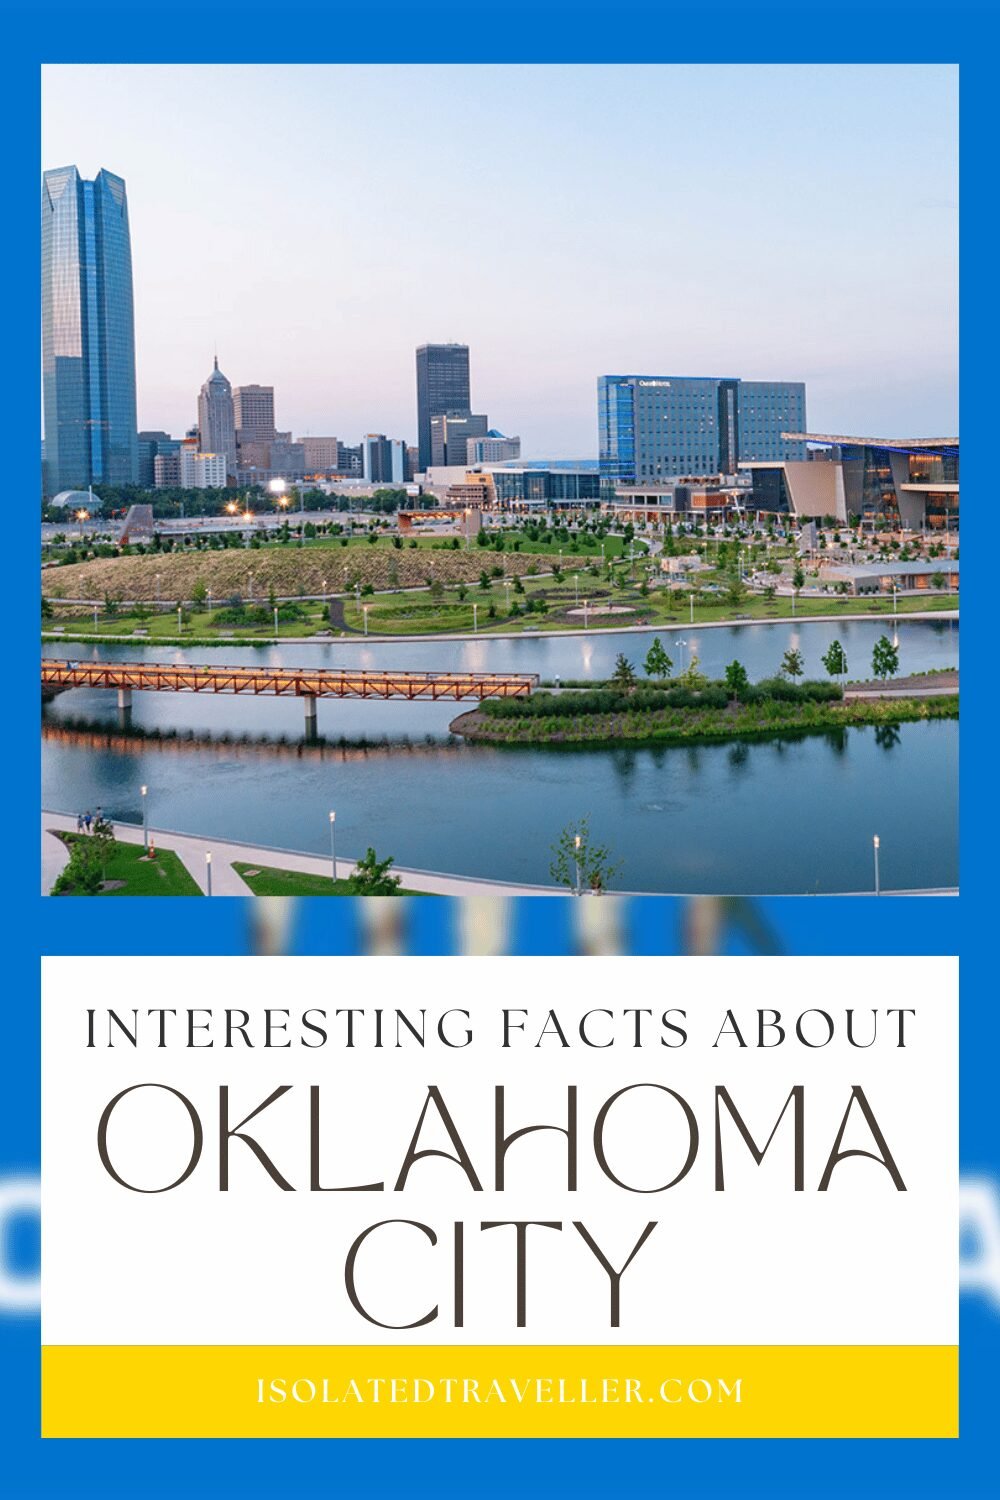 Facts About Oklahoma City